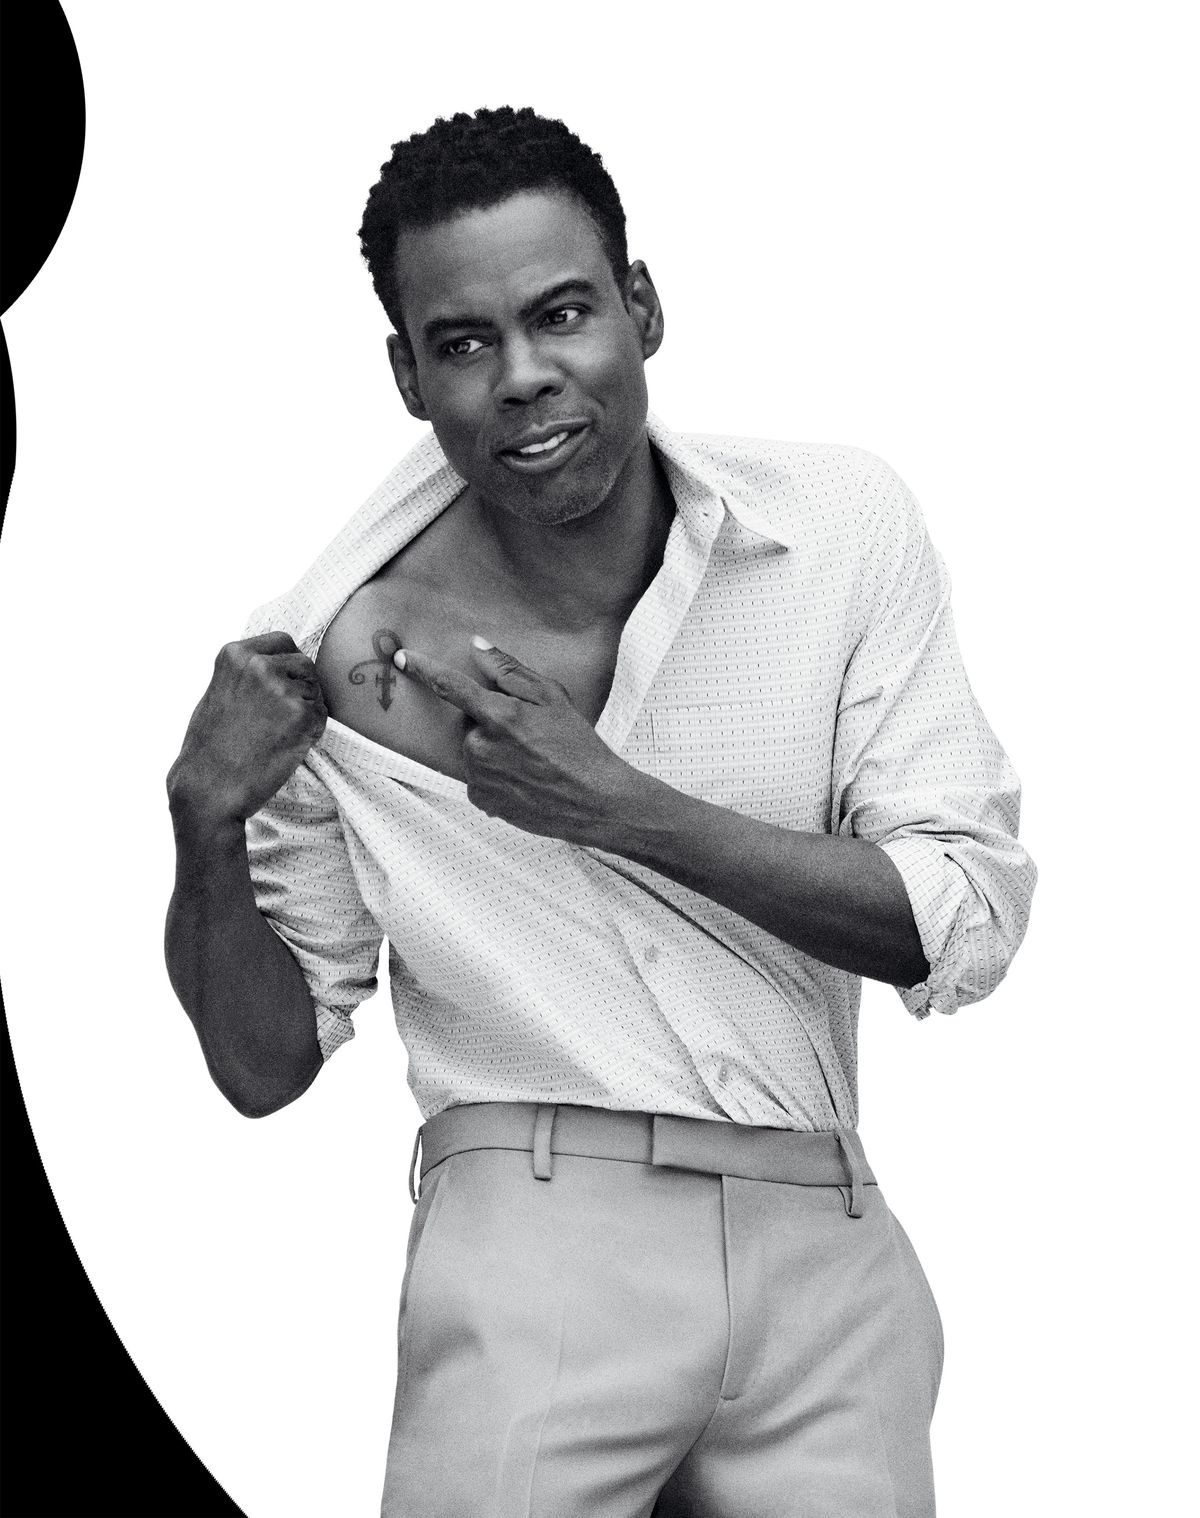 Chris Rock Interview on 'Spiral' Saw Movie, Fargo, and His Long Career